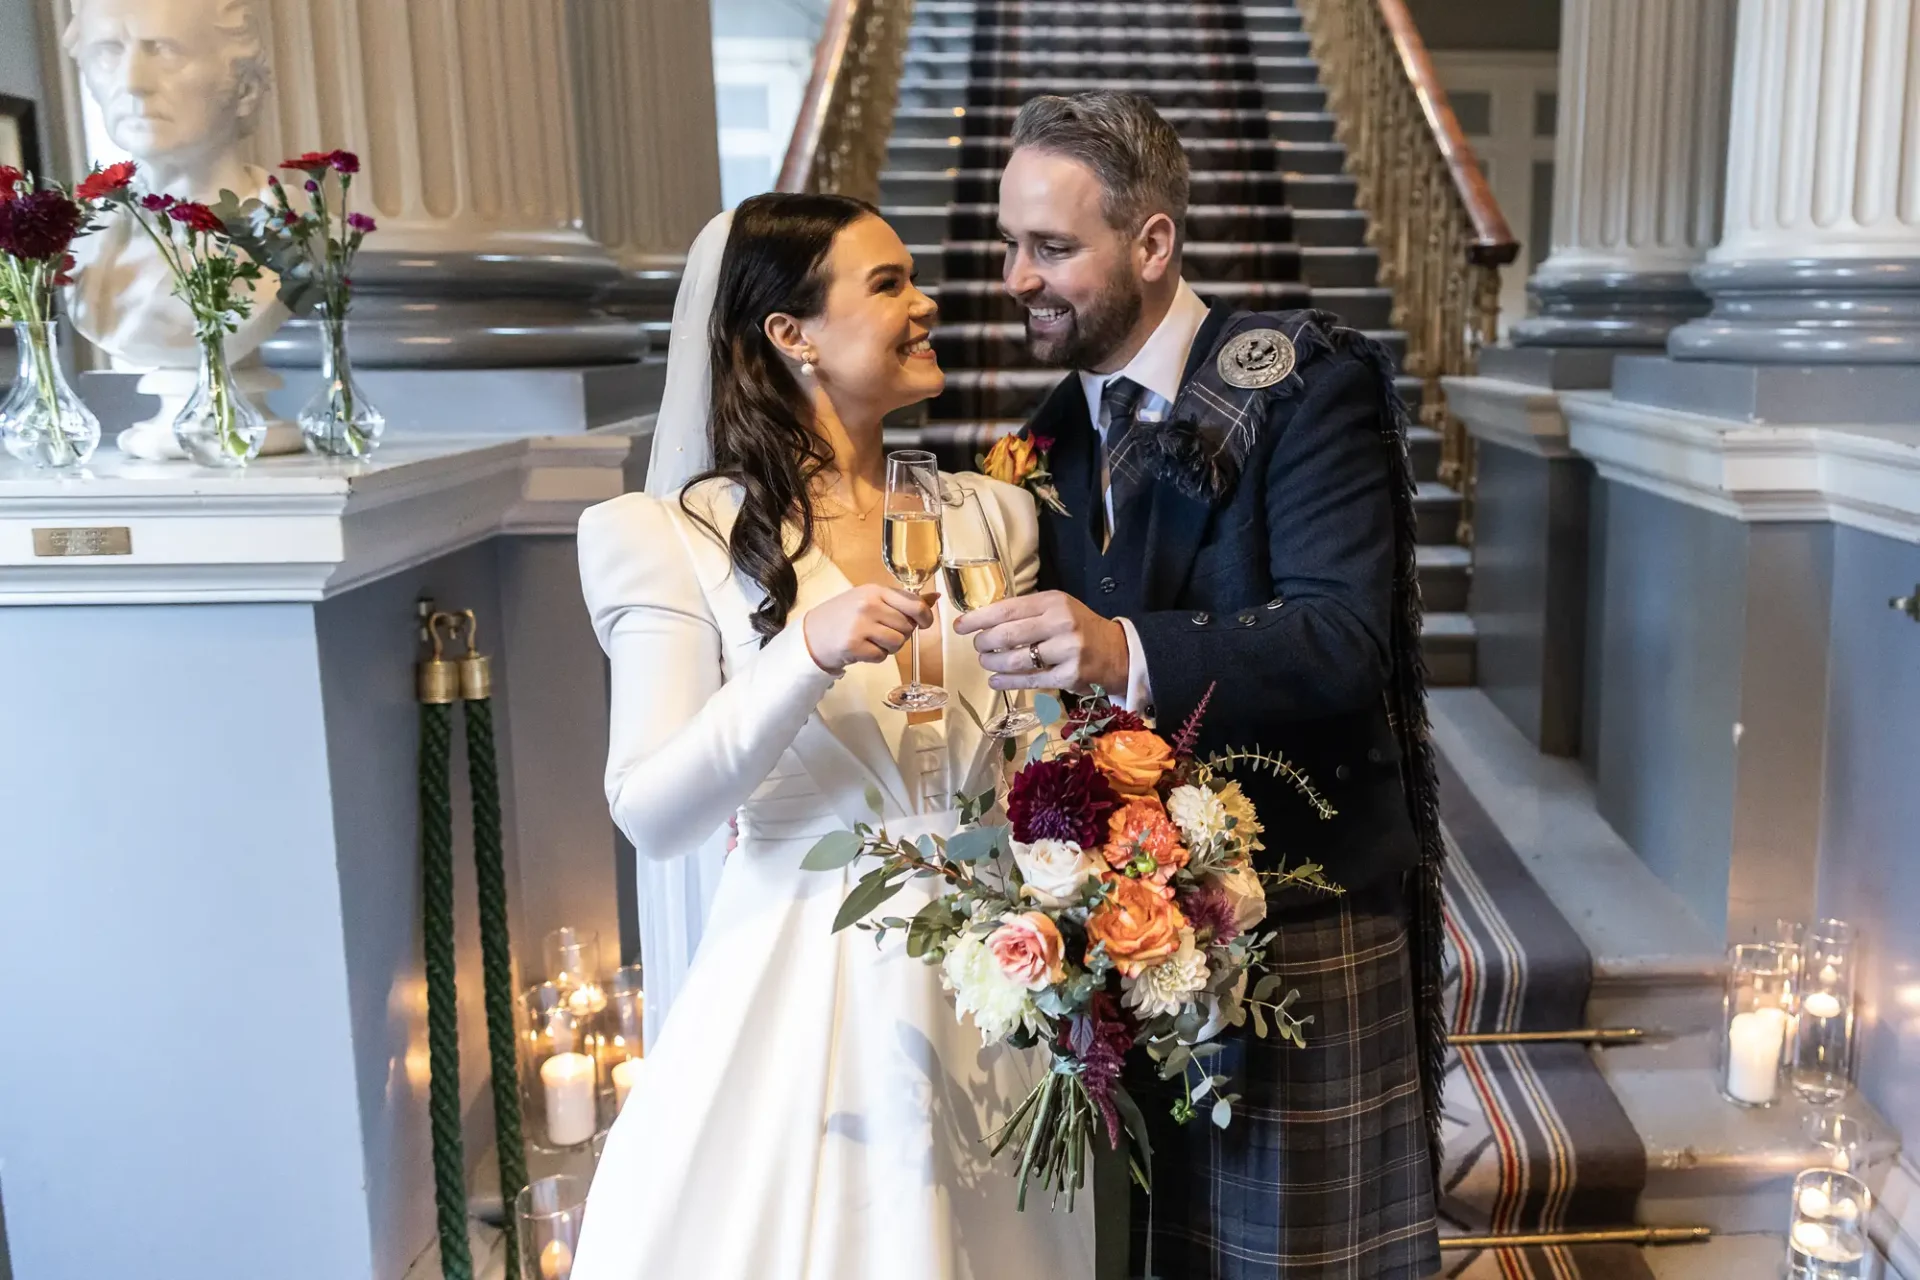 A bride and groom in formal attire, toasting with champagne on a staircase decorated with candles and flowers.